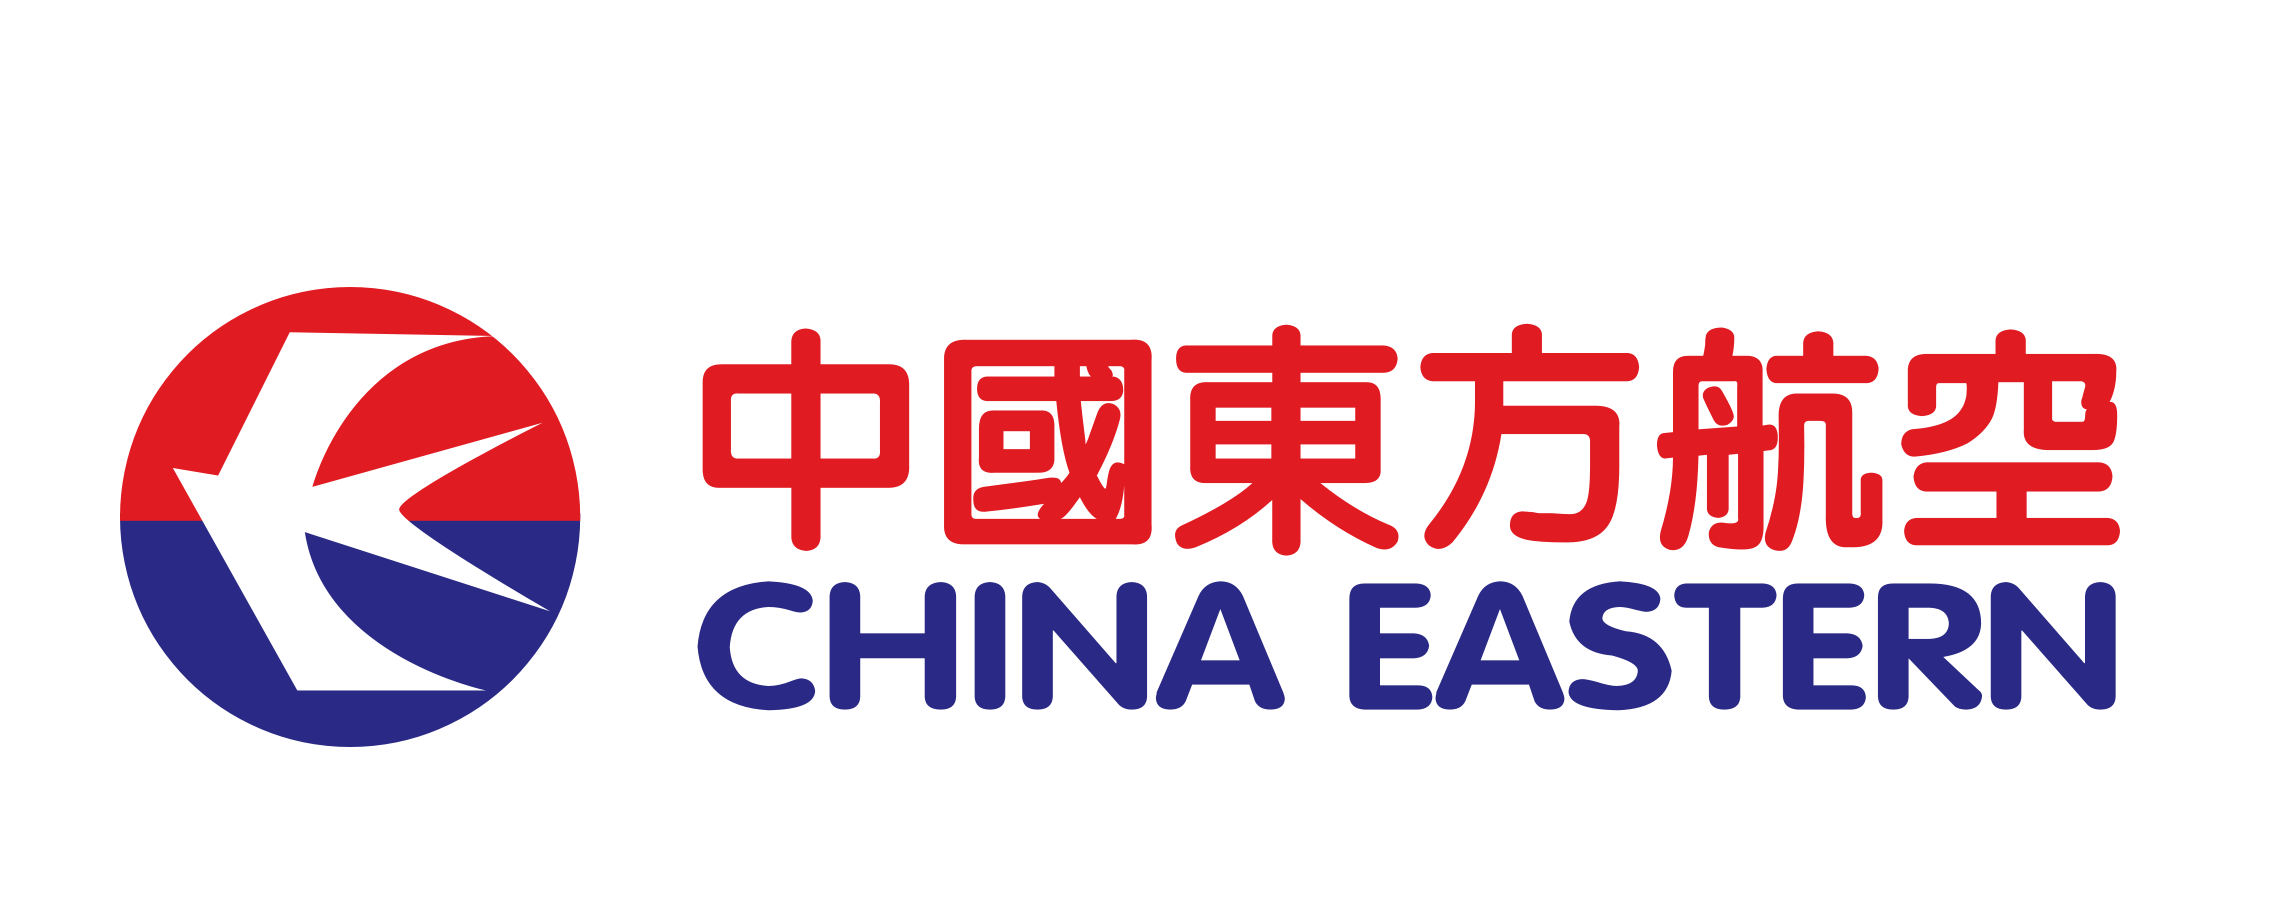 China Eastern Airlines - 9673